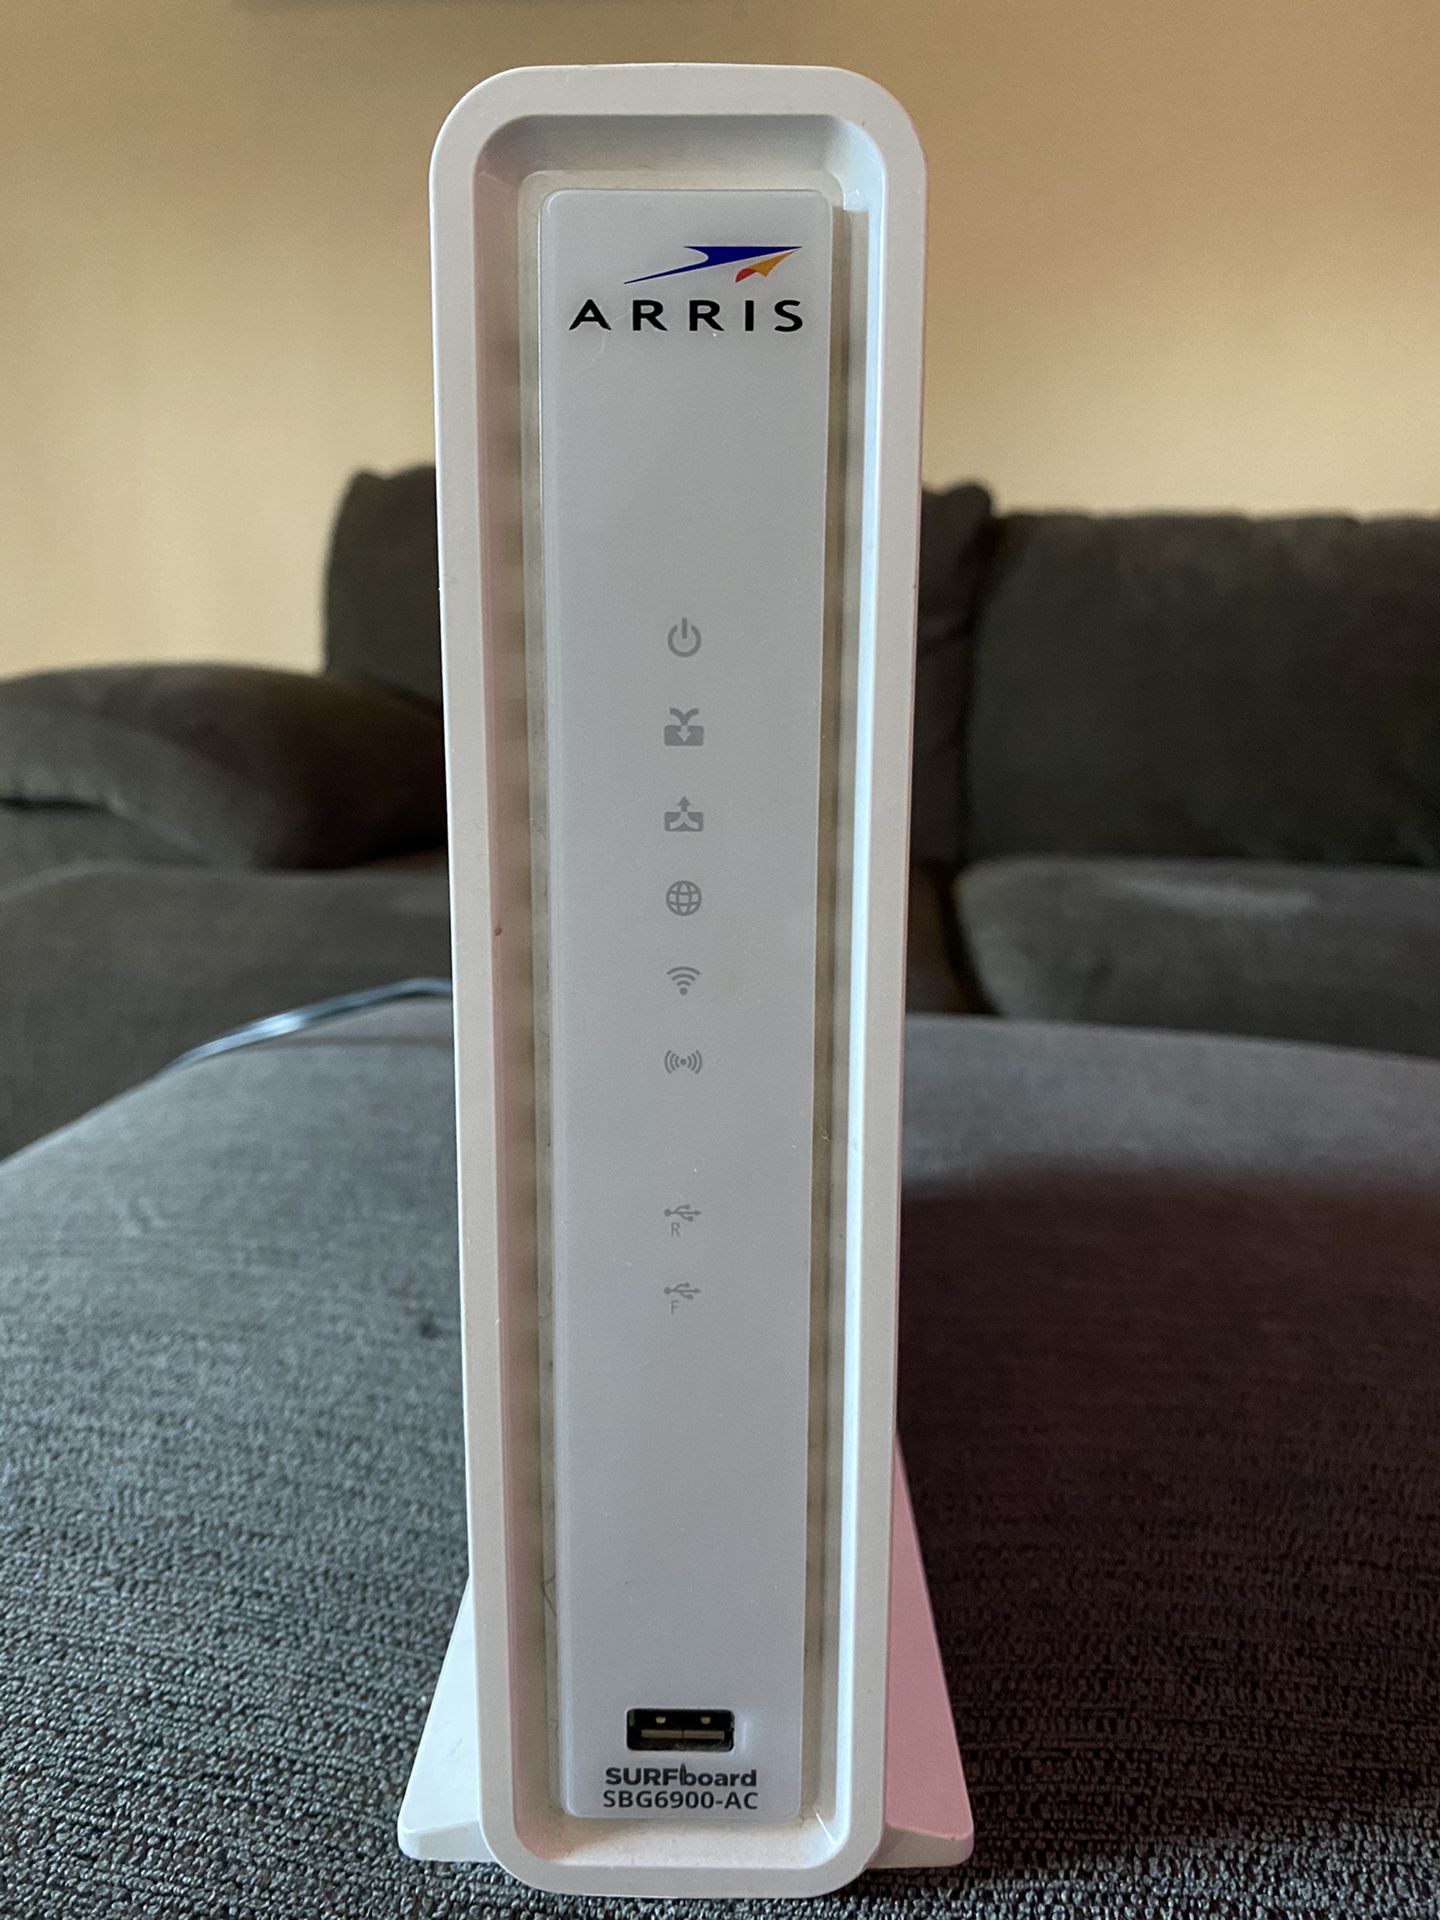 Cable Modem & Wi-Fi Router